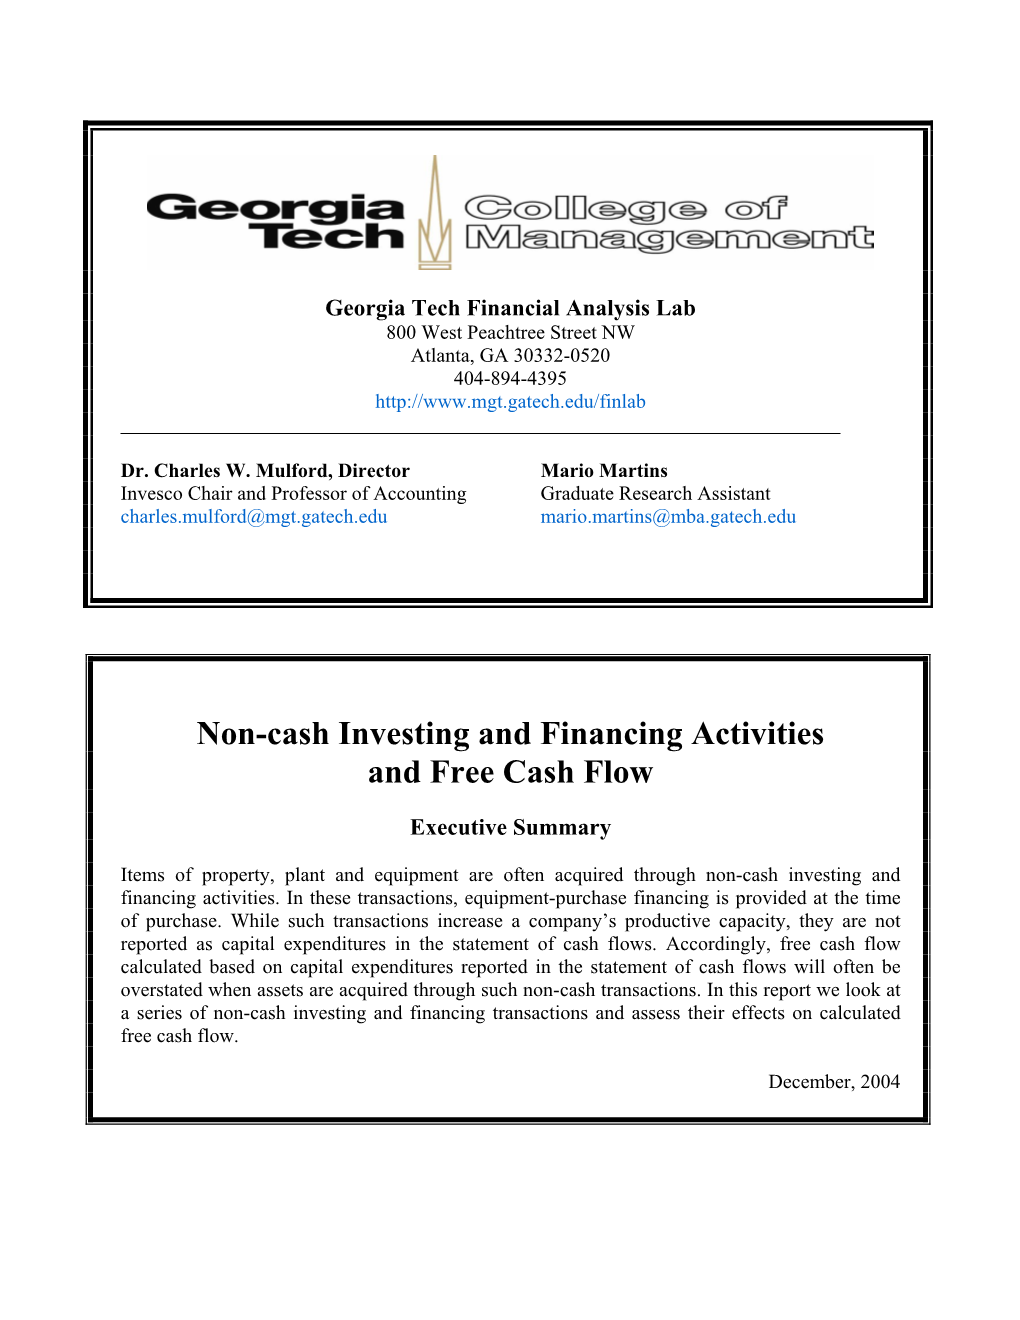 Non-Cash Investing and Financing Activities and Free Cash Flow